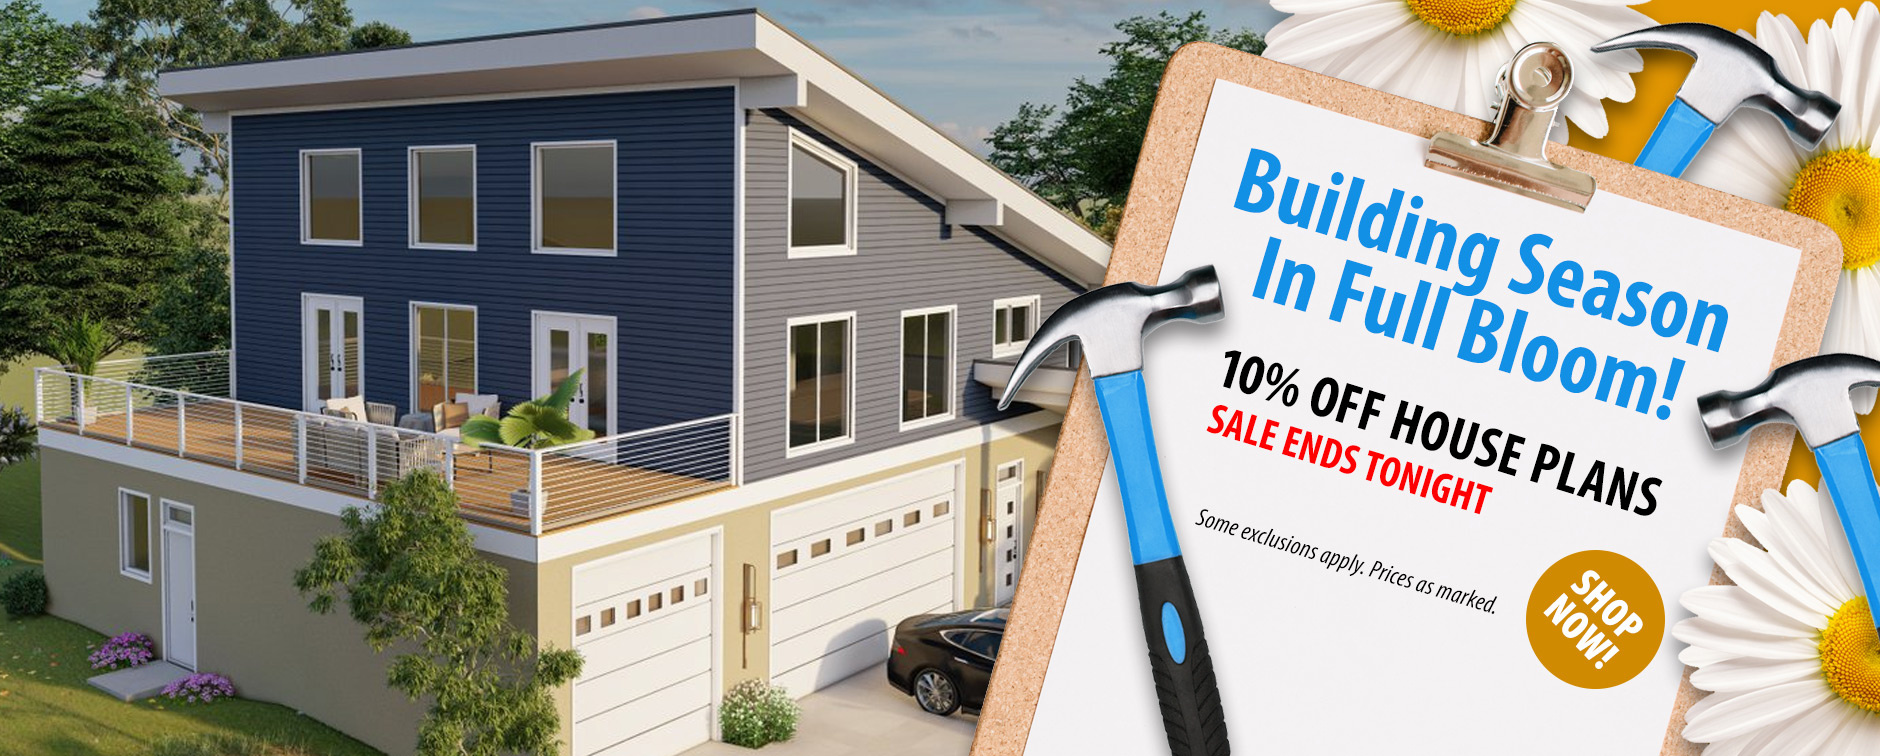 Building Season in Full Bloom: Take 10% Off House Plans - Sale Ends Tonight